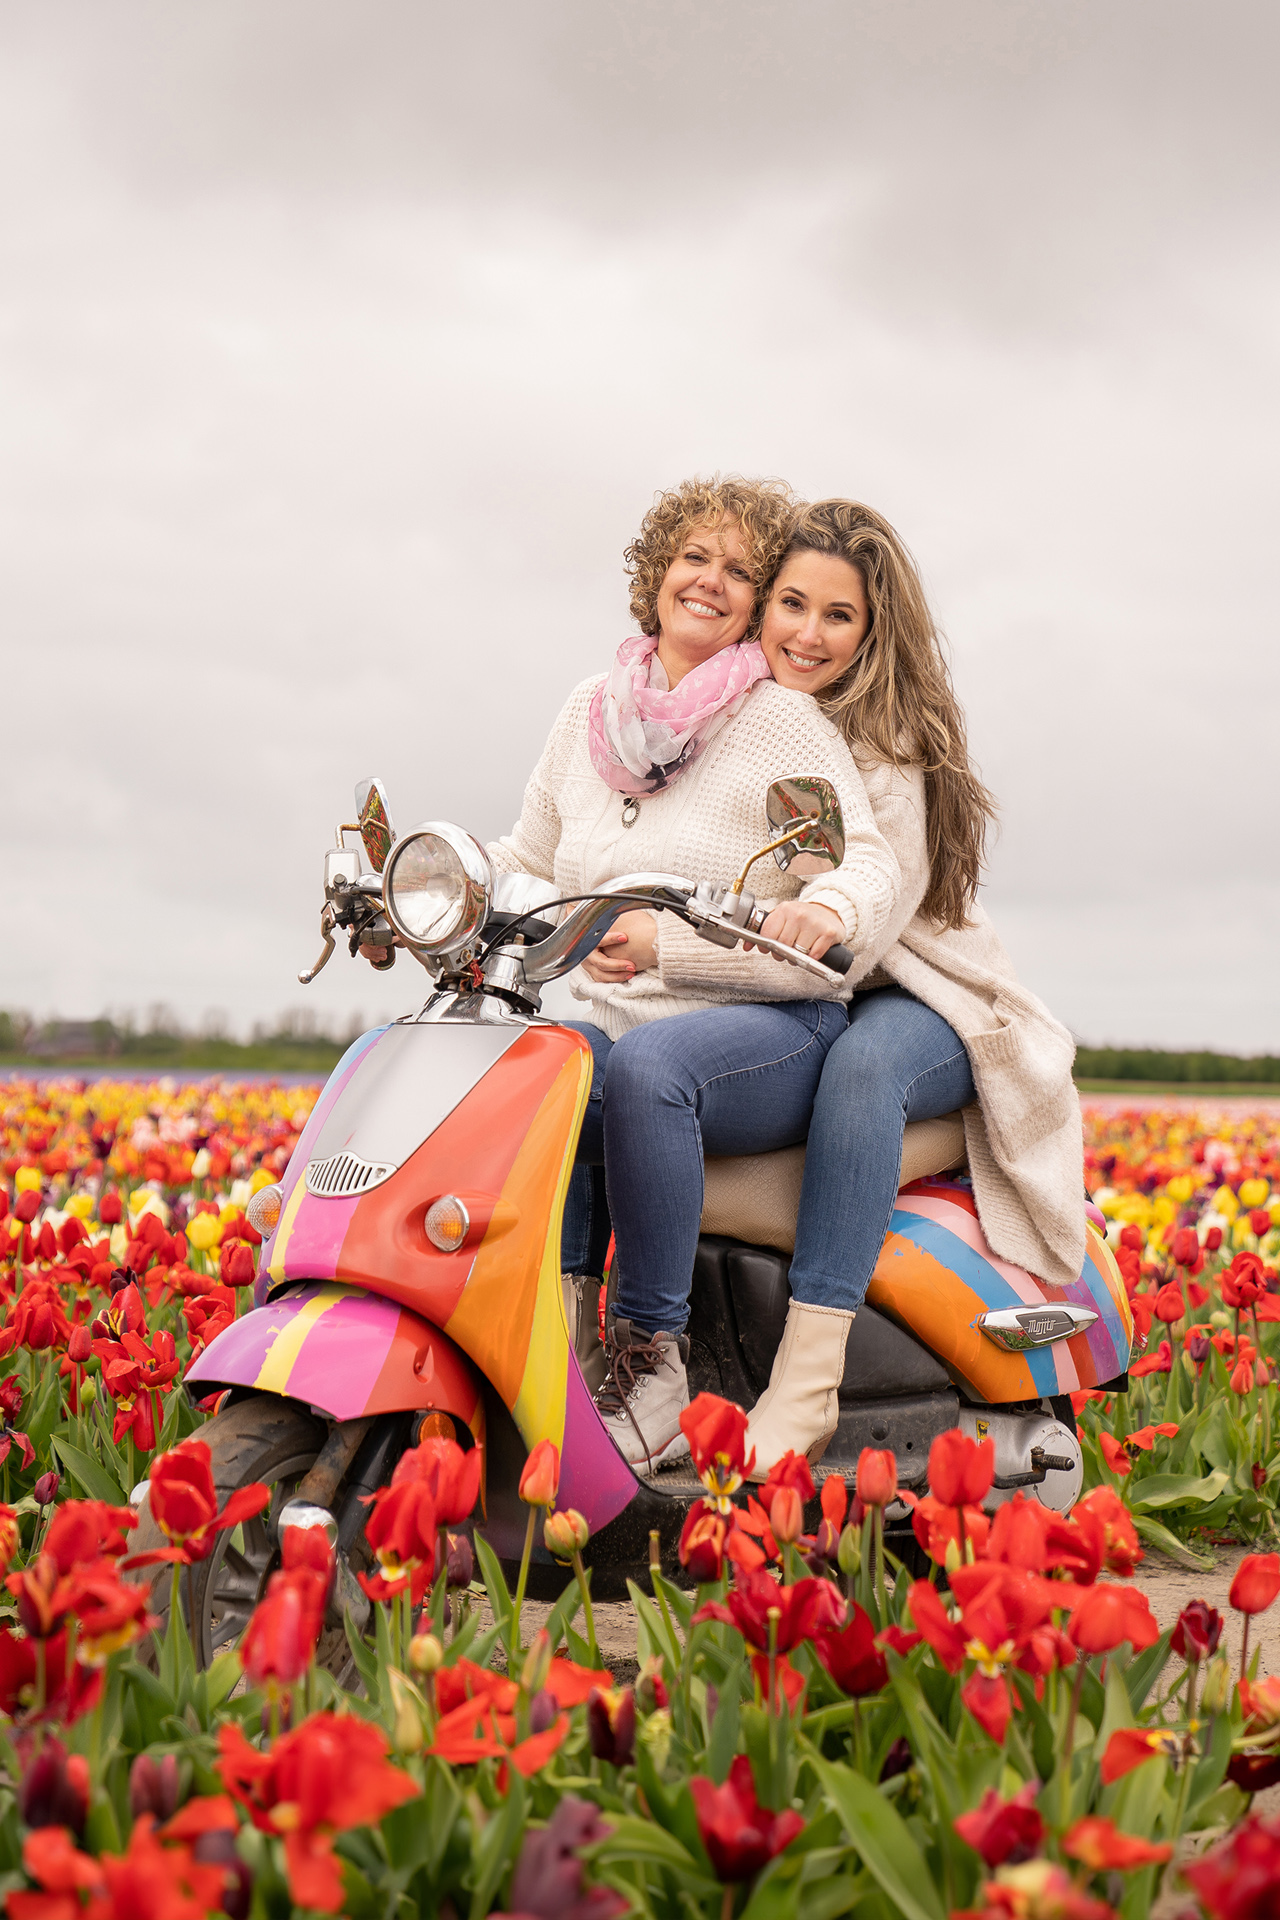 Tulip fields photo of a lesbian couple on a motorcycle in a tulip garden in the Netherlands.